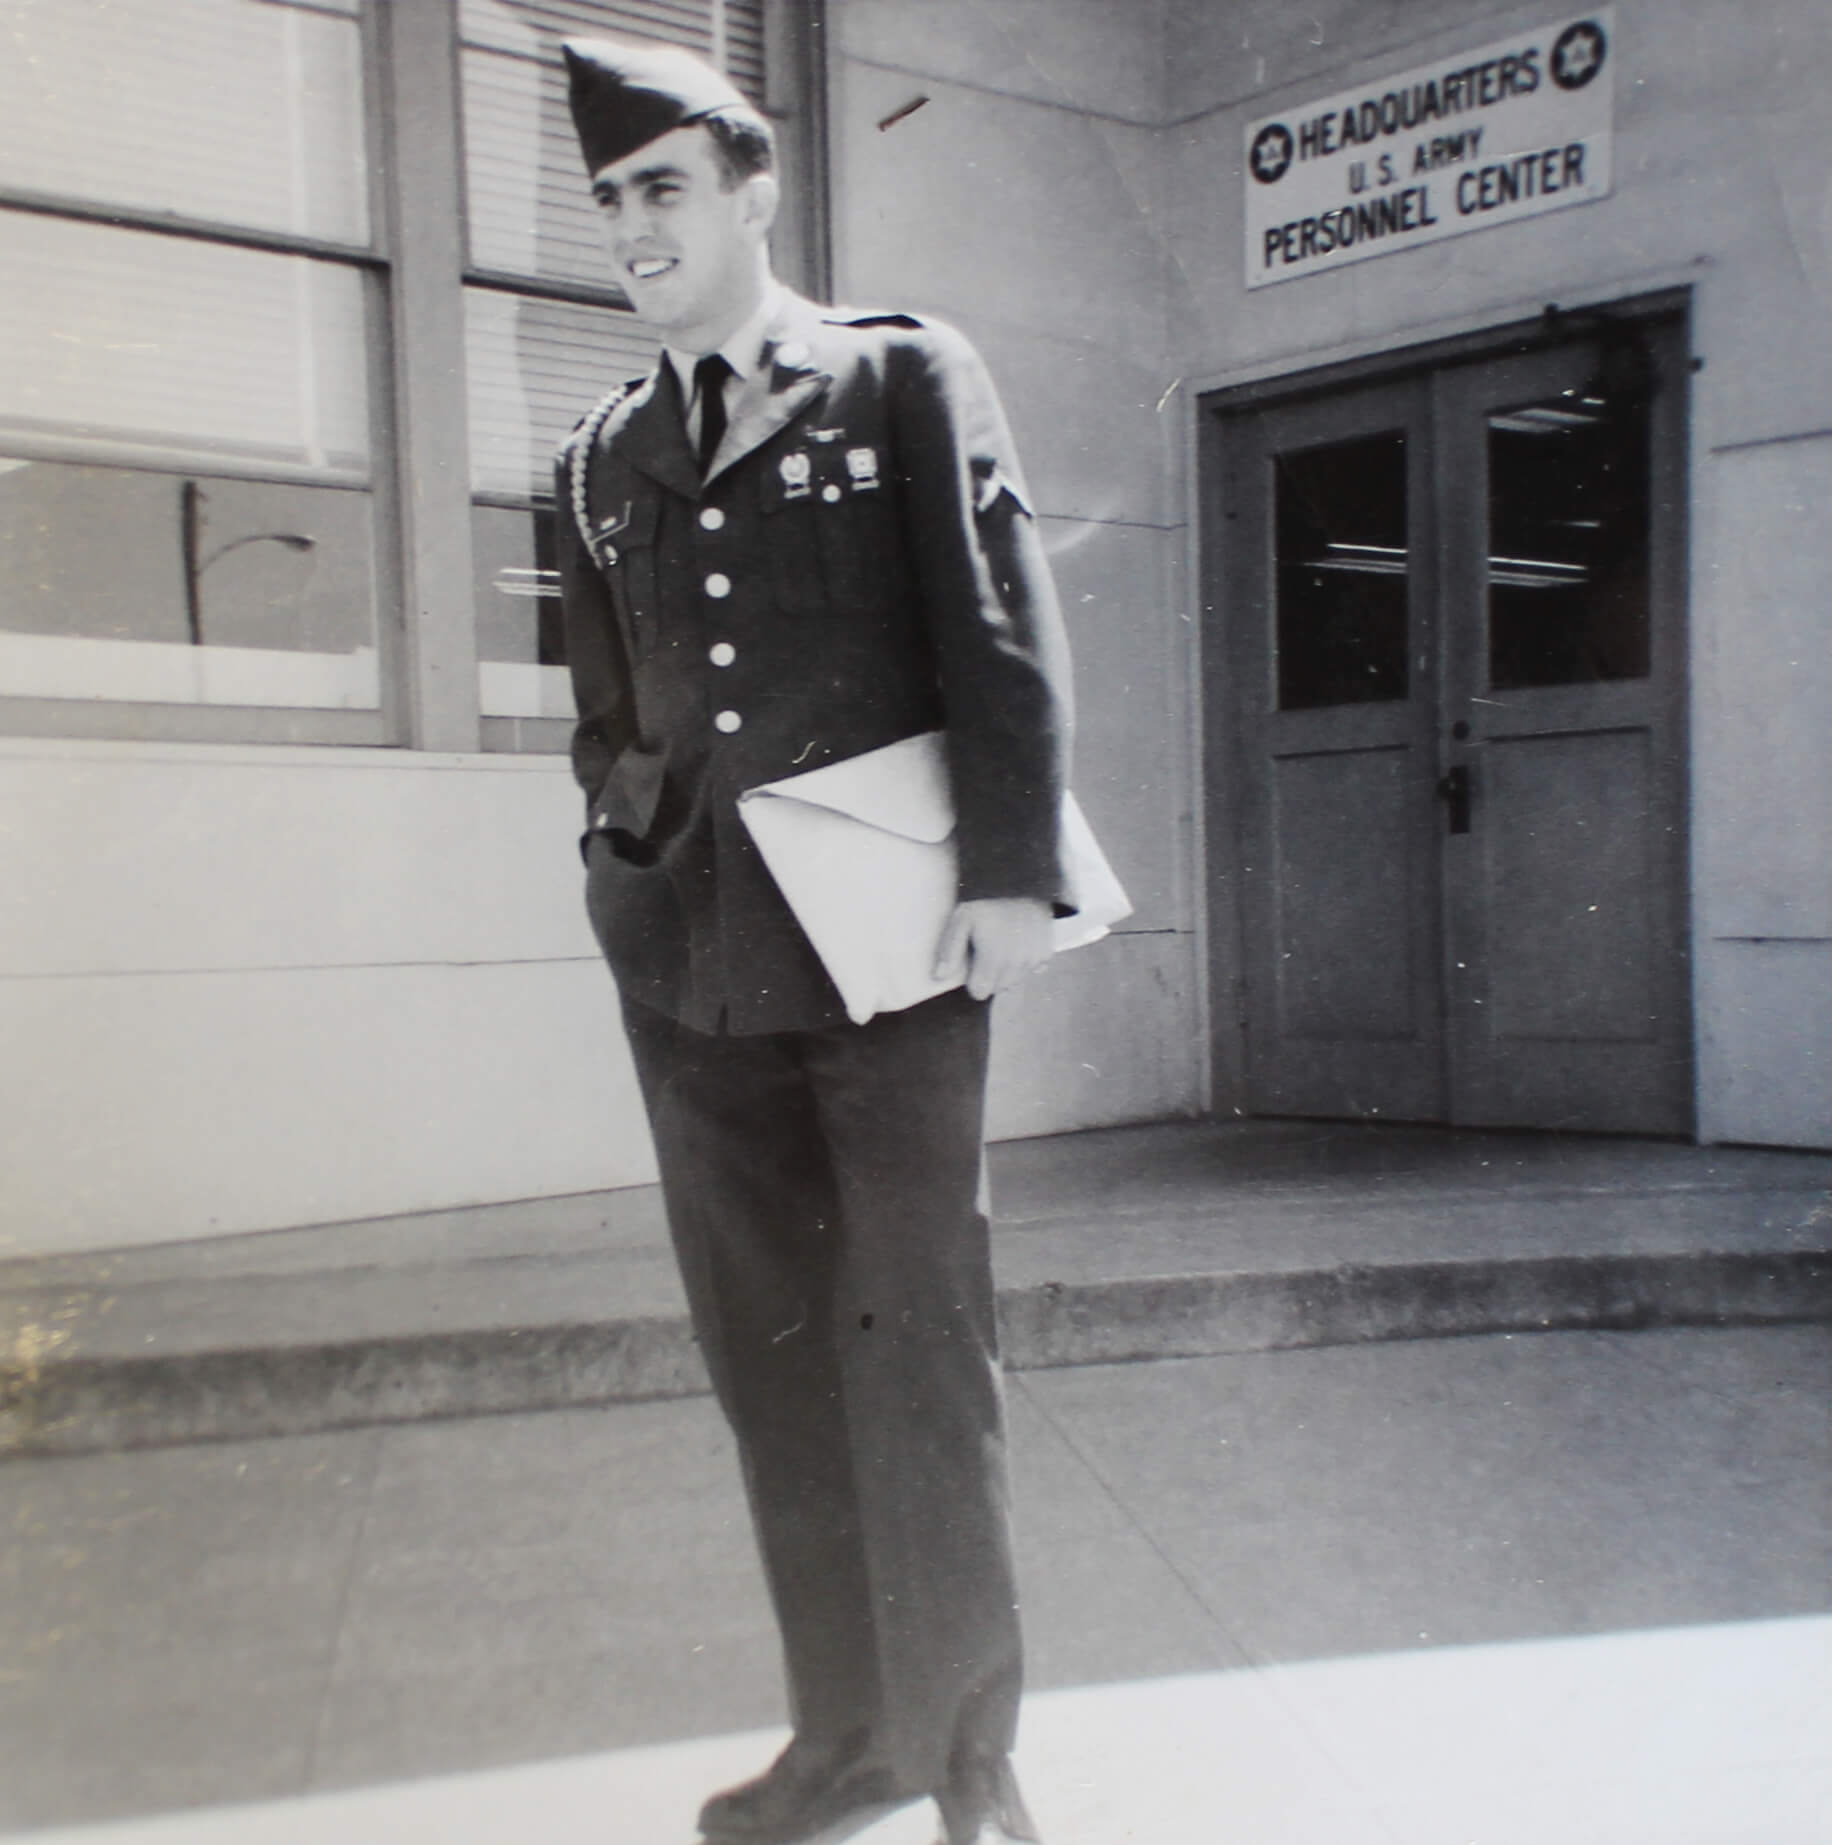 Black and white photo of a young soldier standing in front of the US Army Headquarters Personnel Center.